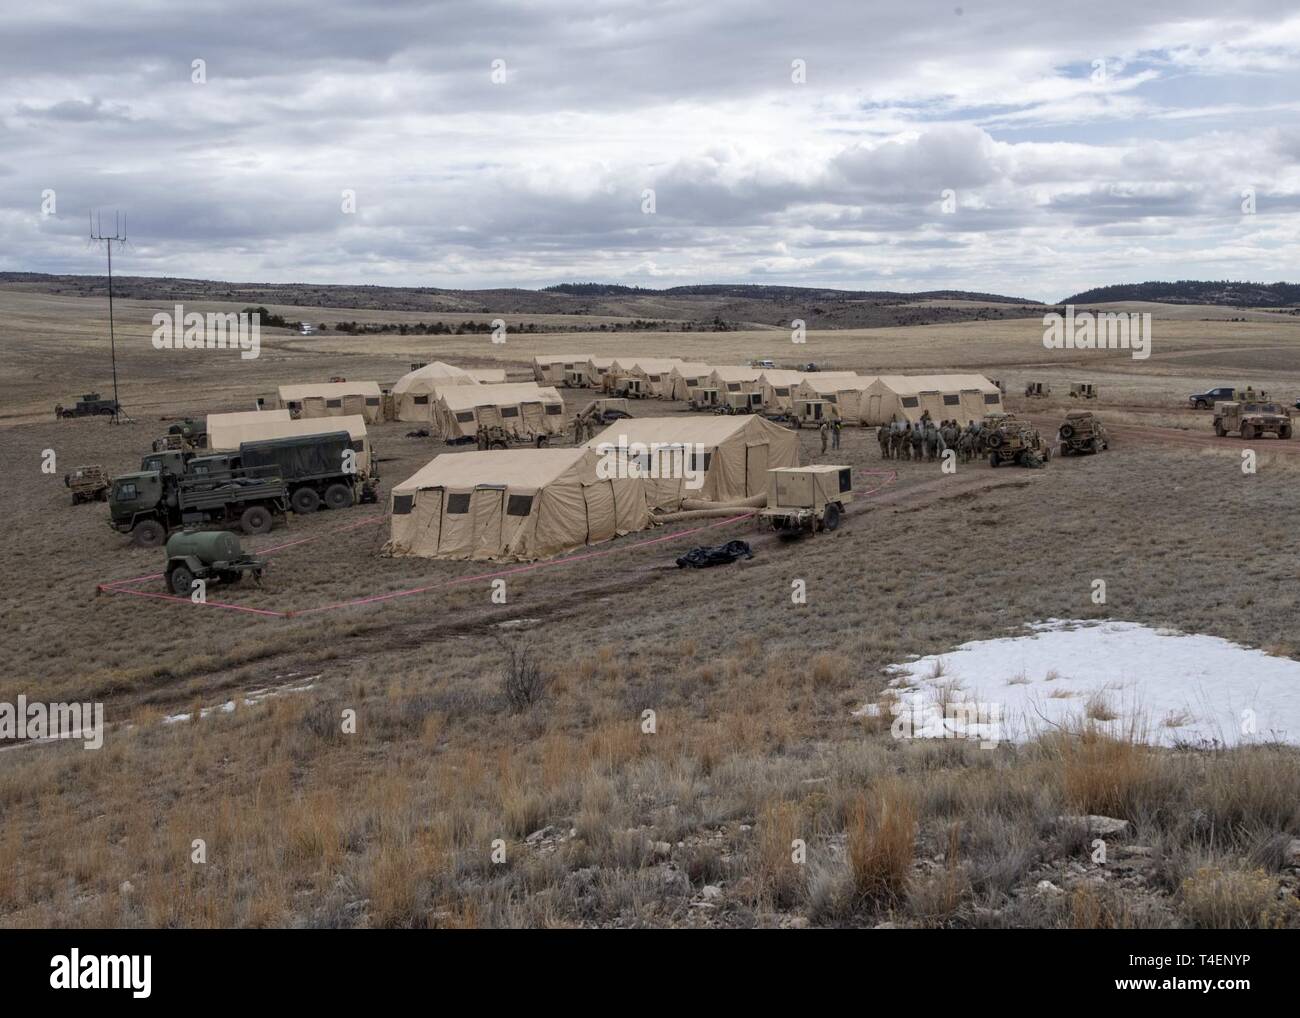 The 823d Base Defense Squadron (BDS) trains at their main operating base during the Mission Readiness Exercise (MRX) at Camp Guernsey, Wyo., March 25, 2019. During the MRX, the 823d BDS practiced adaptive basing in support of National Defense Strategy objectives. This camp was assembled within five hours. Stock Photo